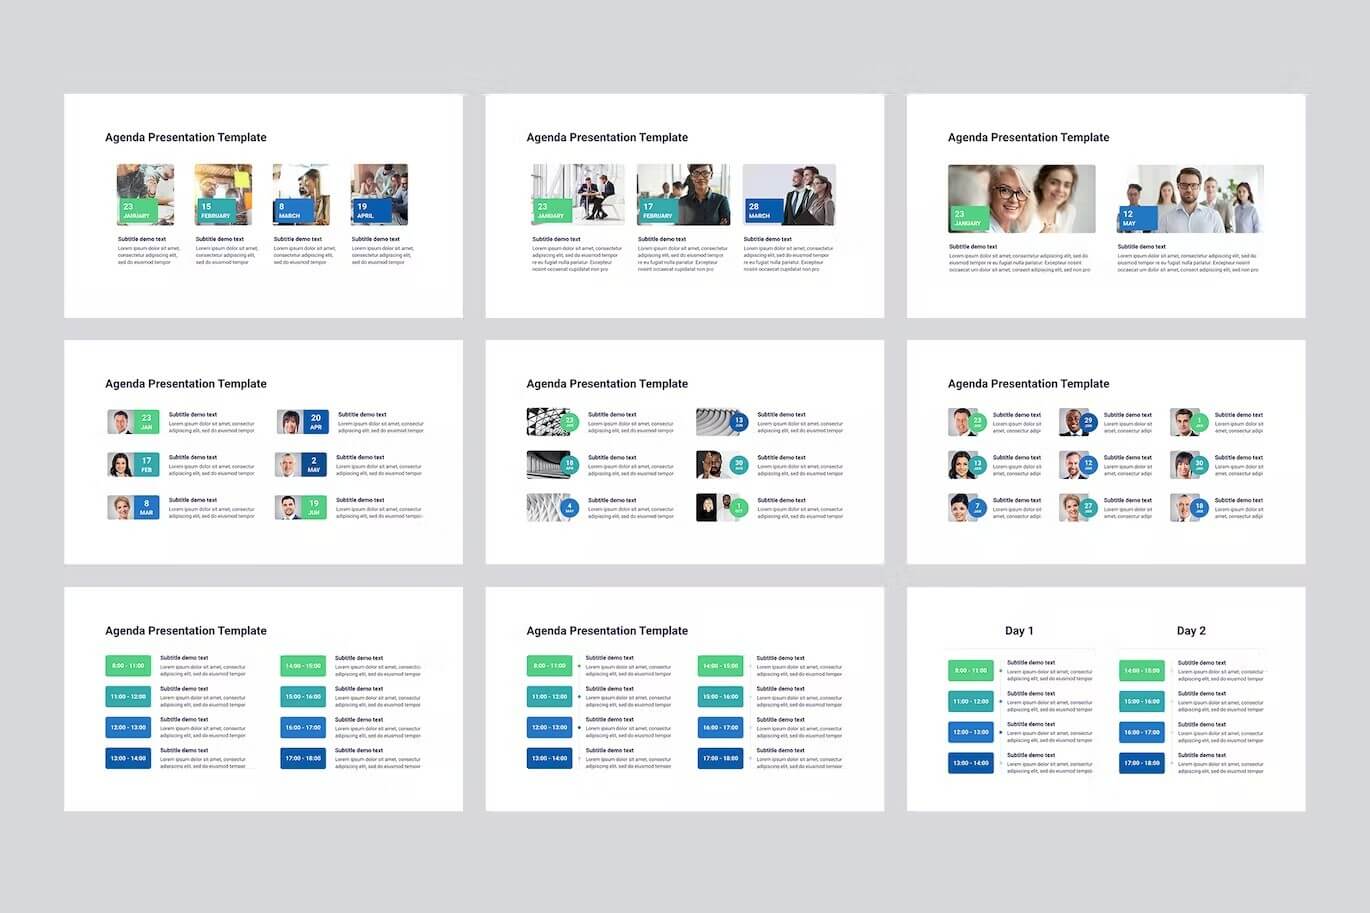 Every minute of your day is full of meaning thanks to the Agenda presentation template.